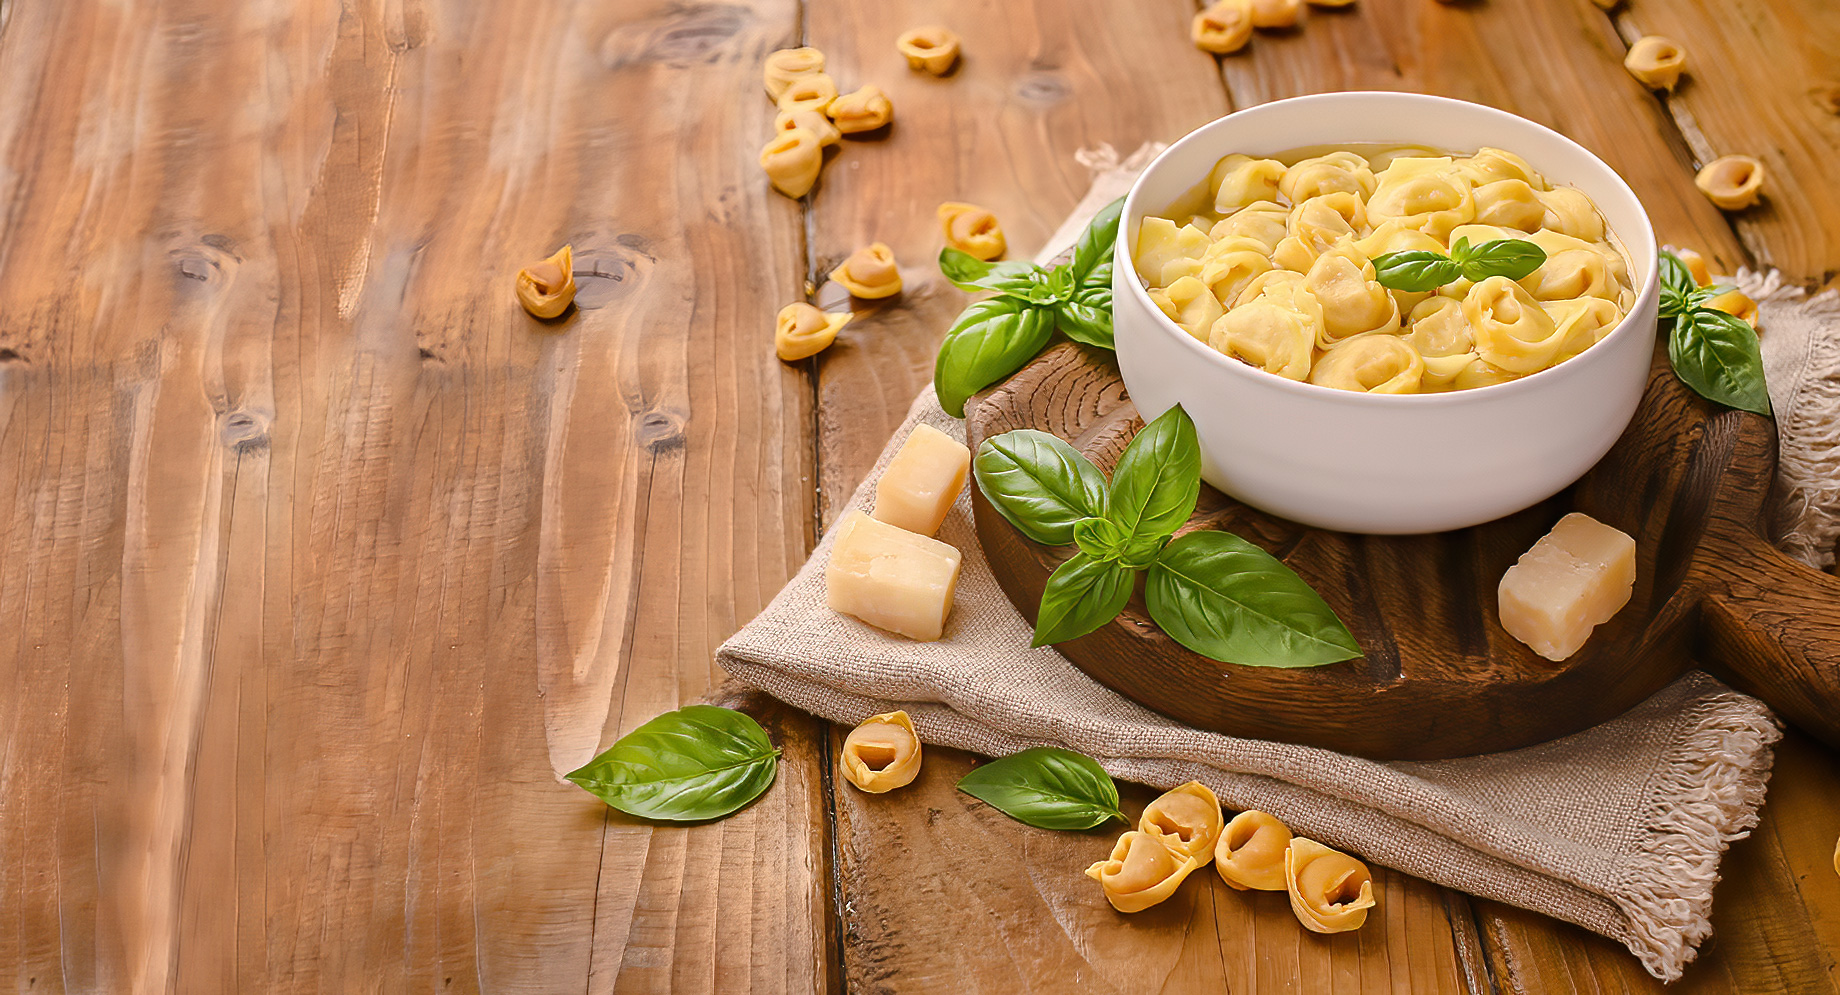 Tortellini Soup, Brodo With Basil and Parmesan - Bologna and Emilia Romagna Cuisine